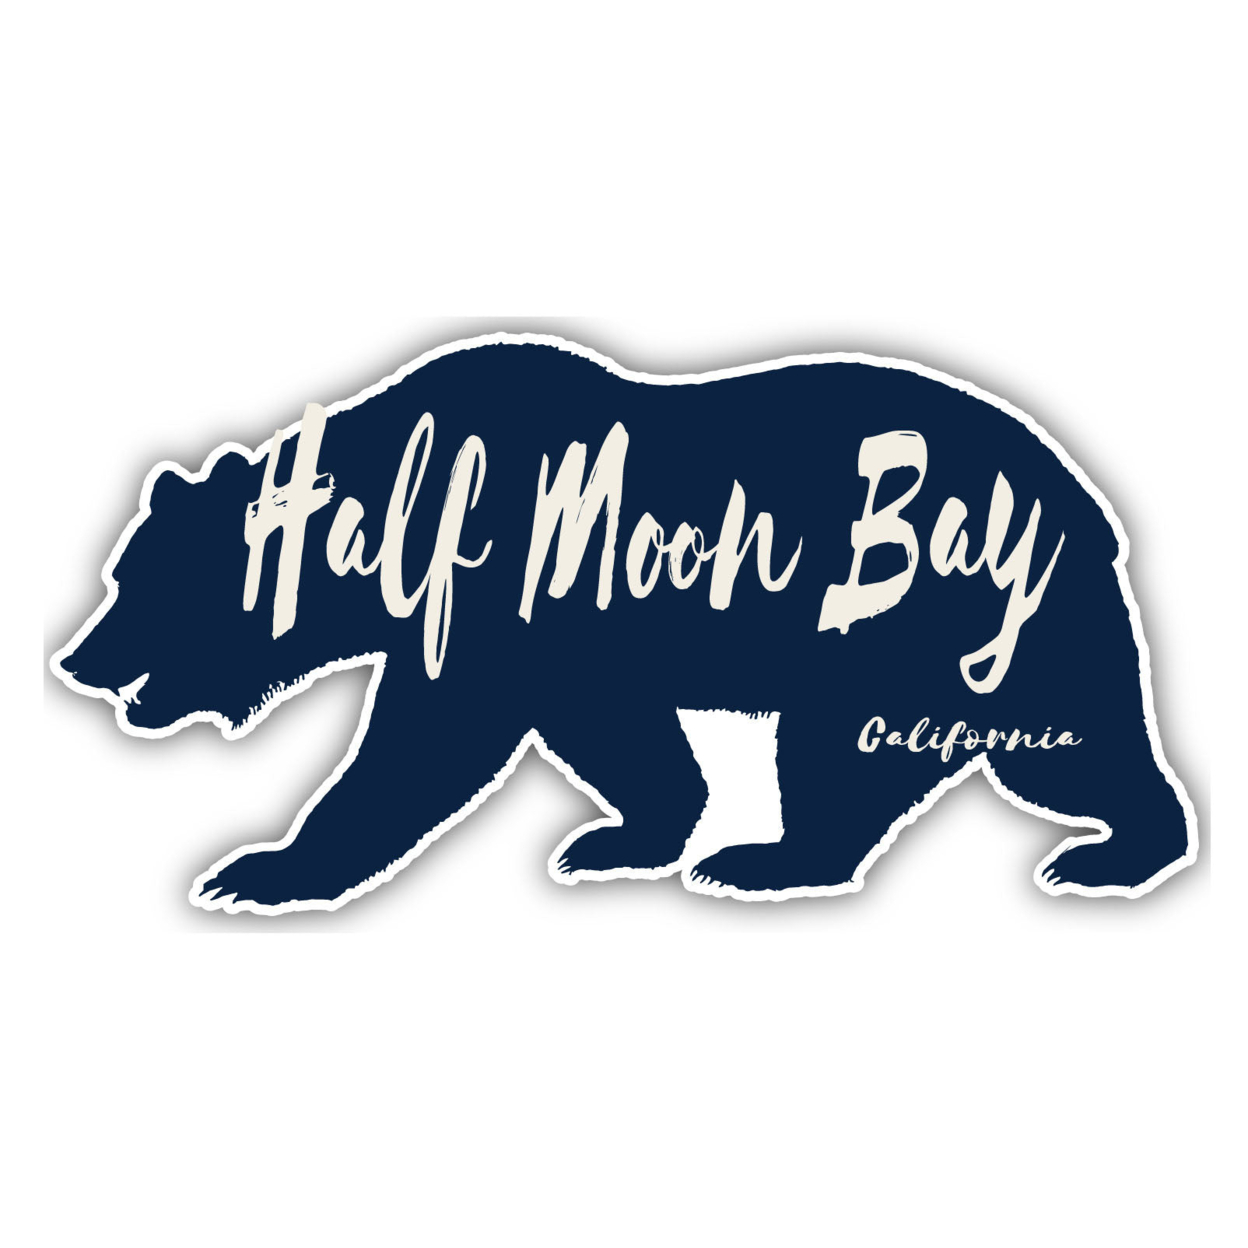 Half Moon Bay California Souvenir Decorative Stickers (Choose Theme And Size) - 4-Pack, 2-Inch, Camp Life